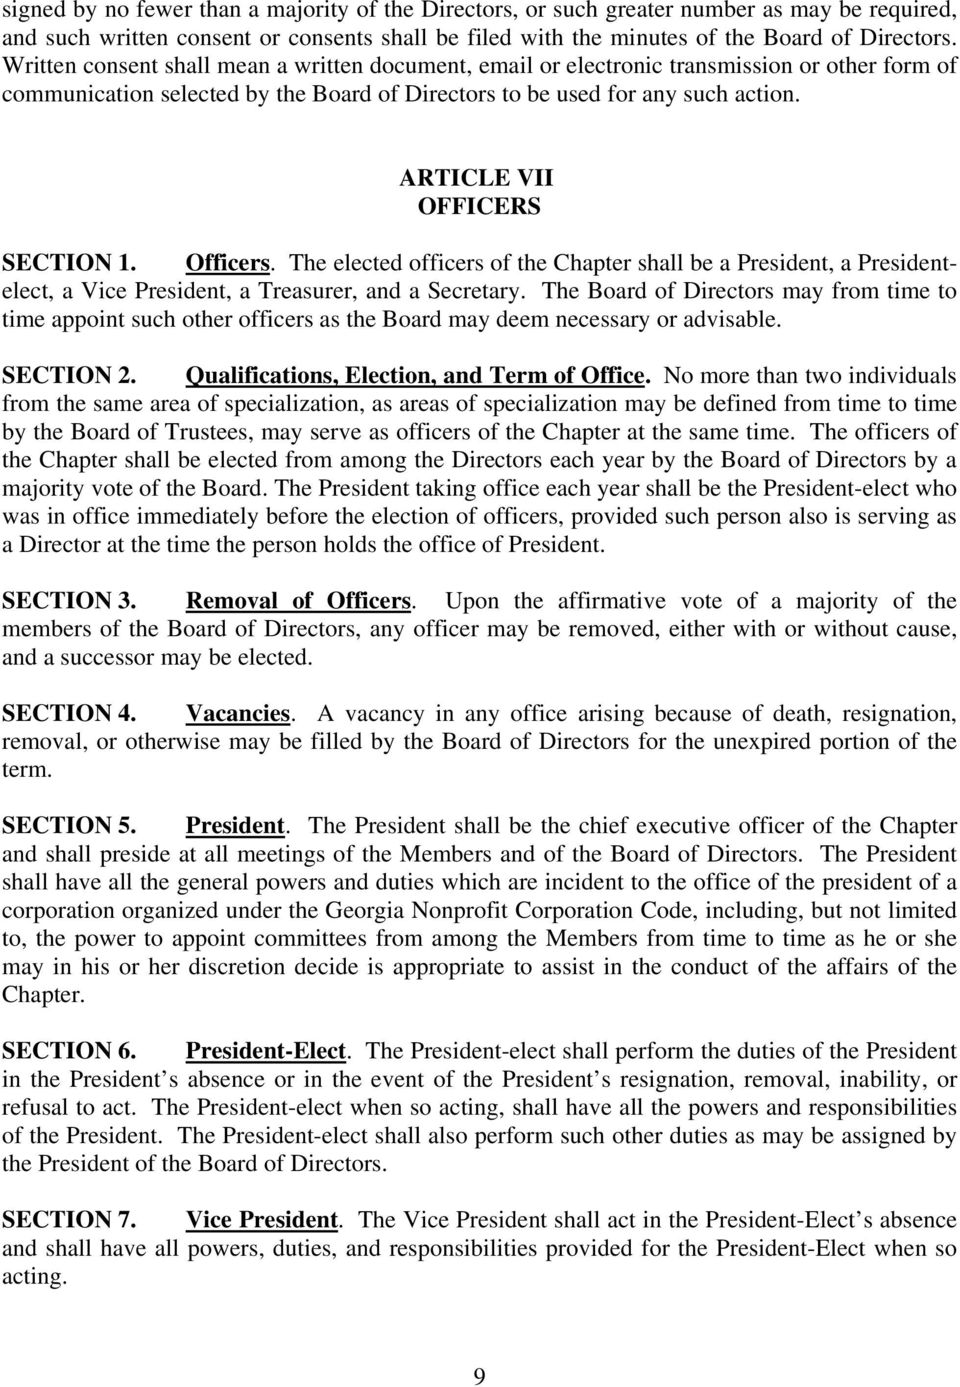 ARTICLE VII OFFICERS SECTION 1. Officers. The elected officers of the Chapter shall be a President, a Presidentelect, a Vice President, a Treasurer, and a Secretary.